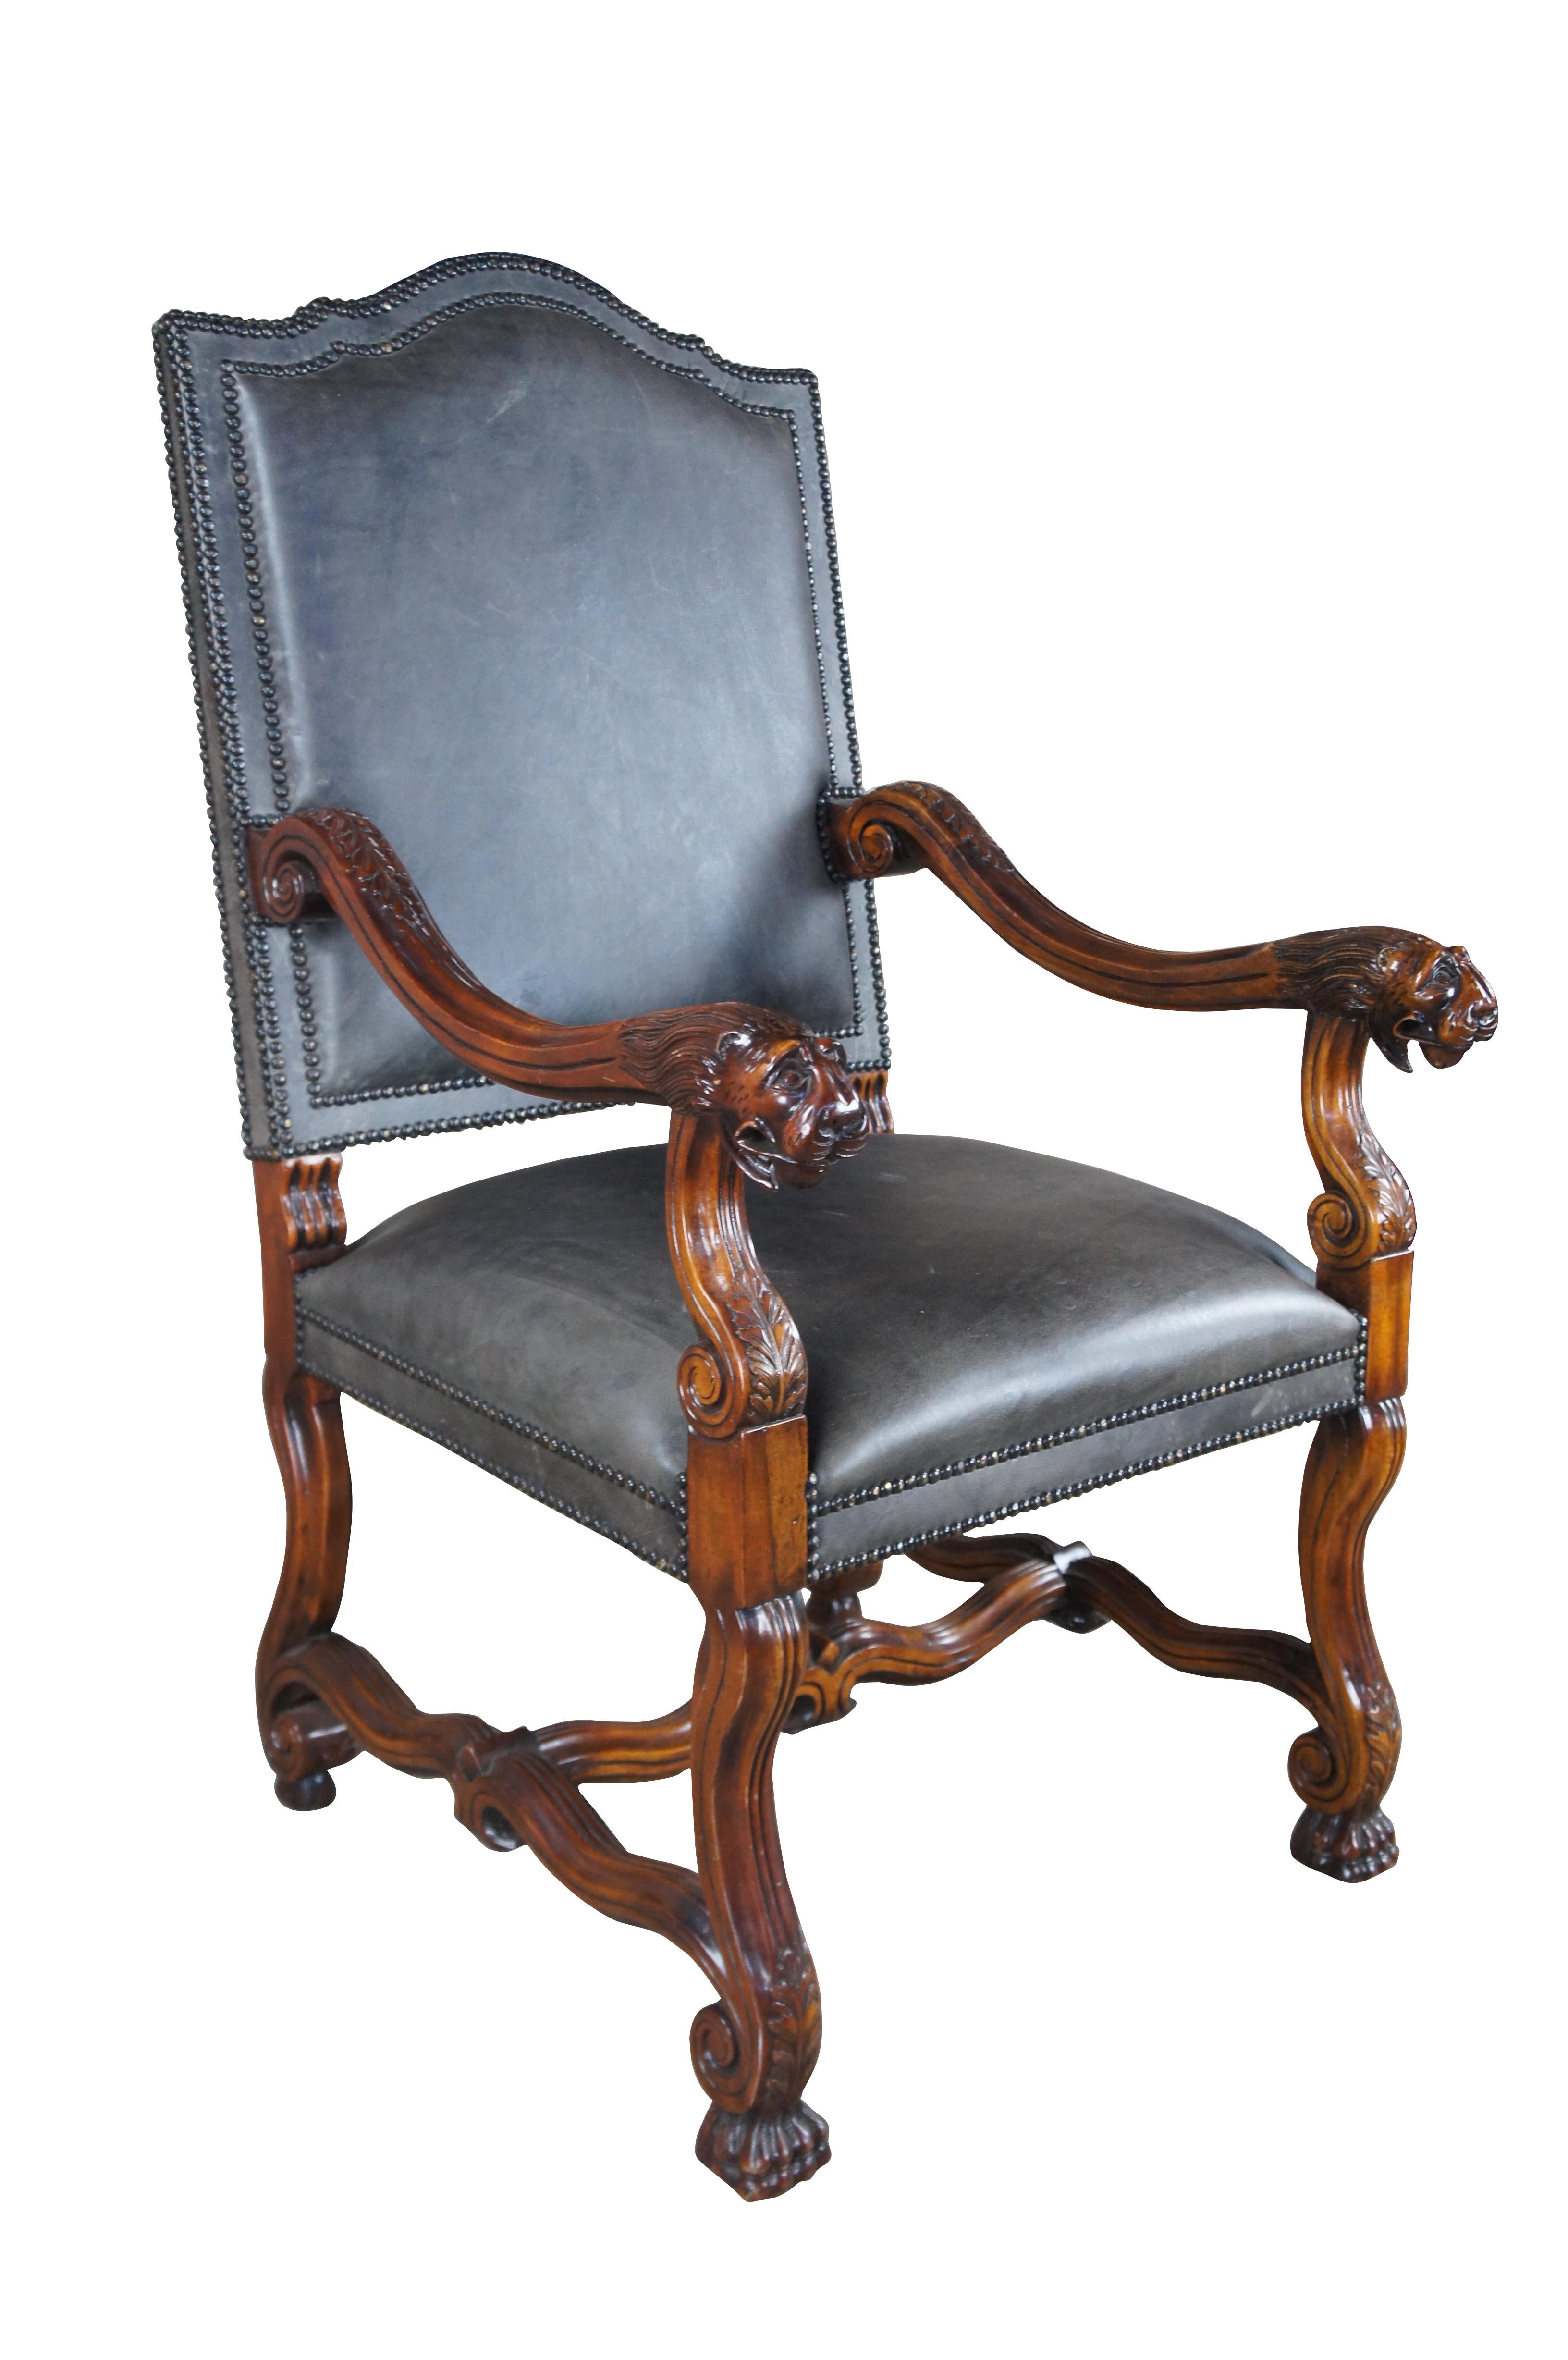 Spanish Colonial Theodore Alexander Spanish Tuscan Figural Lion Head Mahogany Leather Arm Chair For Sale